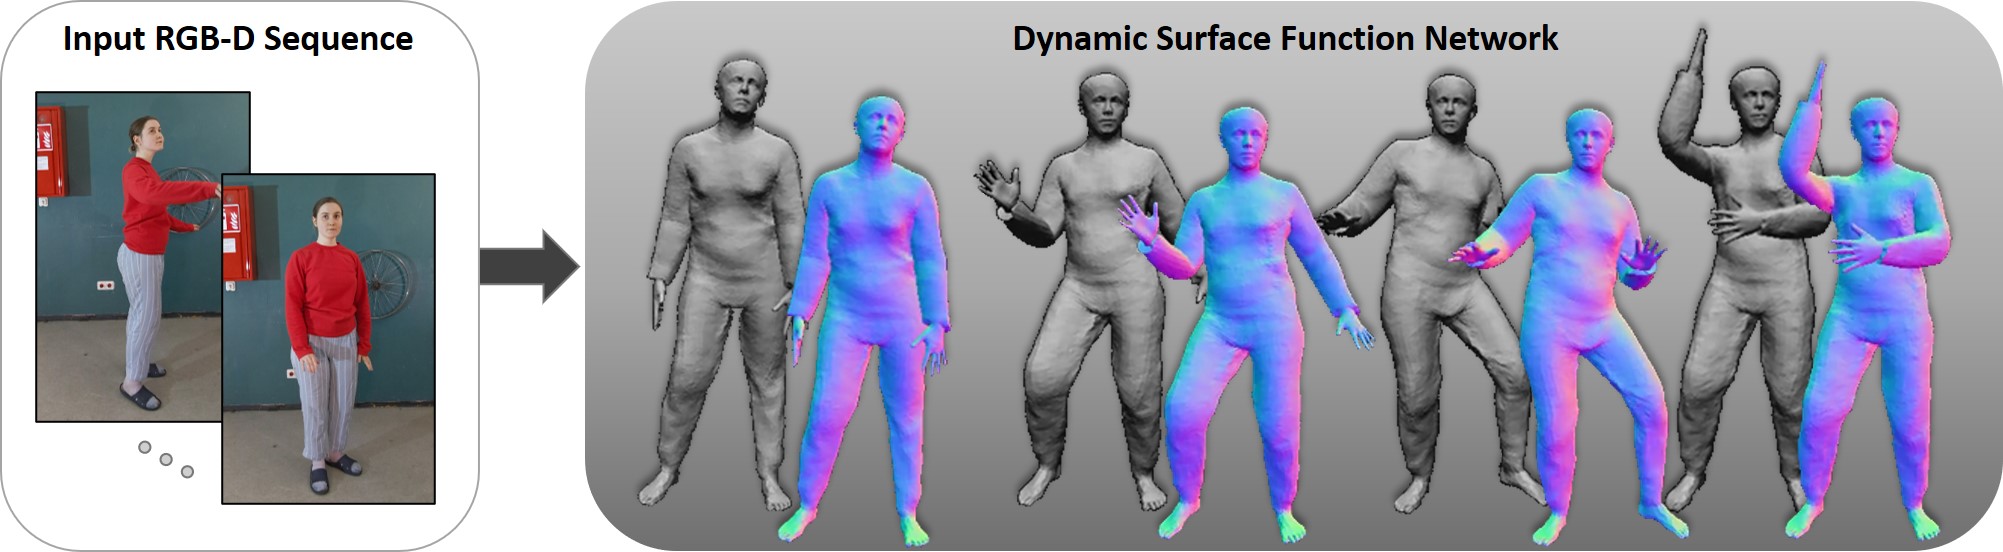 Dynamic Surface Function Networks for Clothed Human Bodies